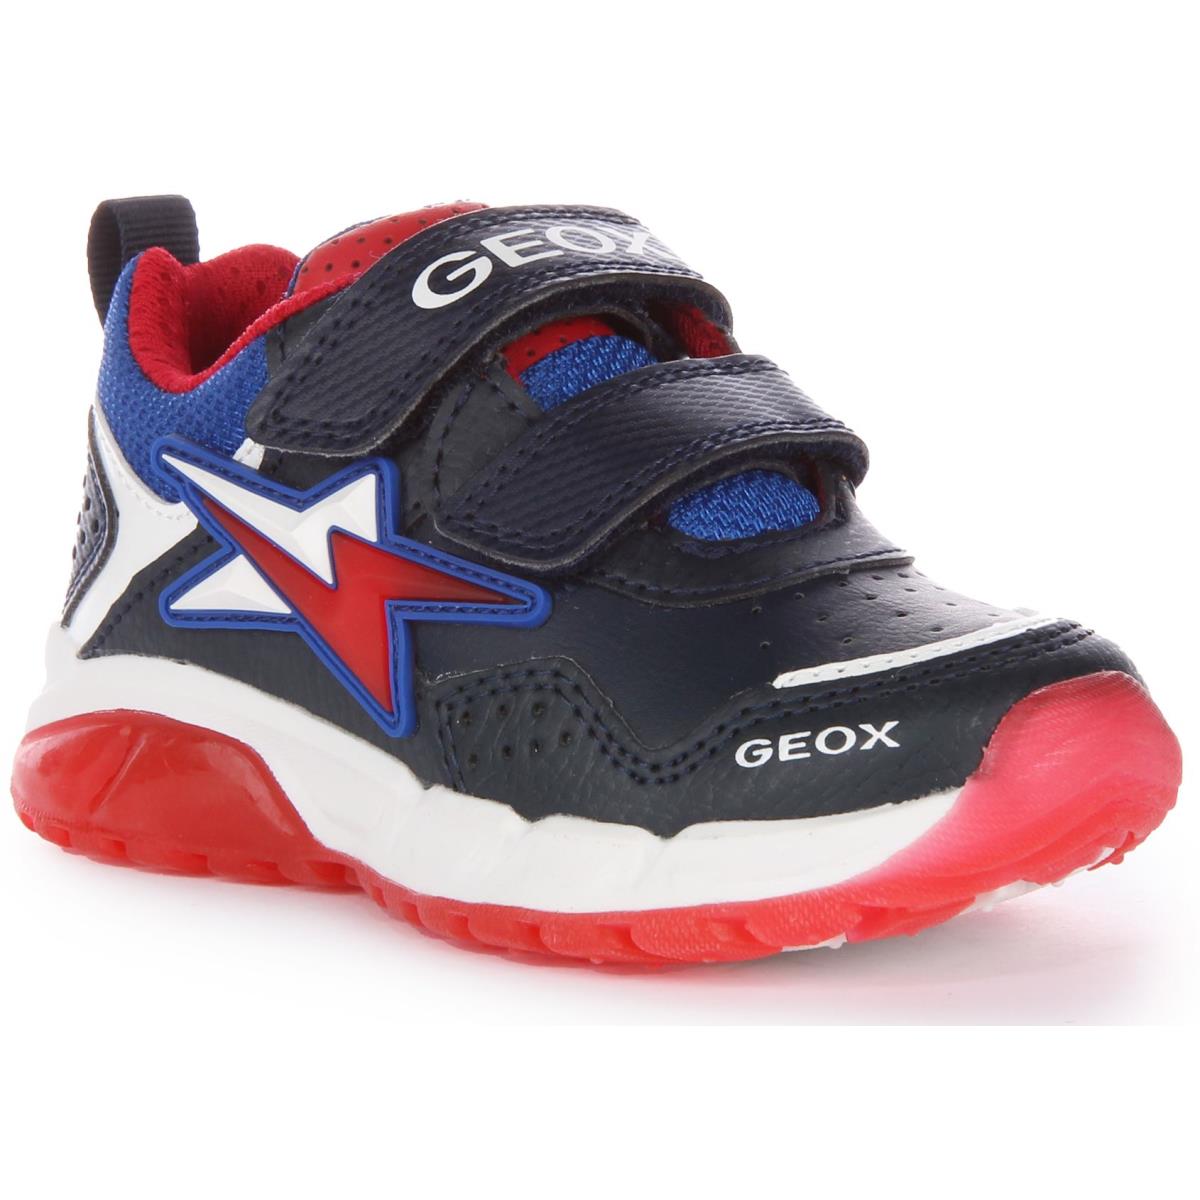 Geox J Spaziale Light Up Strap Shoe Navy Red Kids Size US US 0.5C - 13.5C NAVY RED